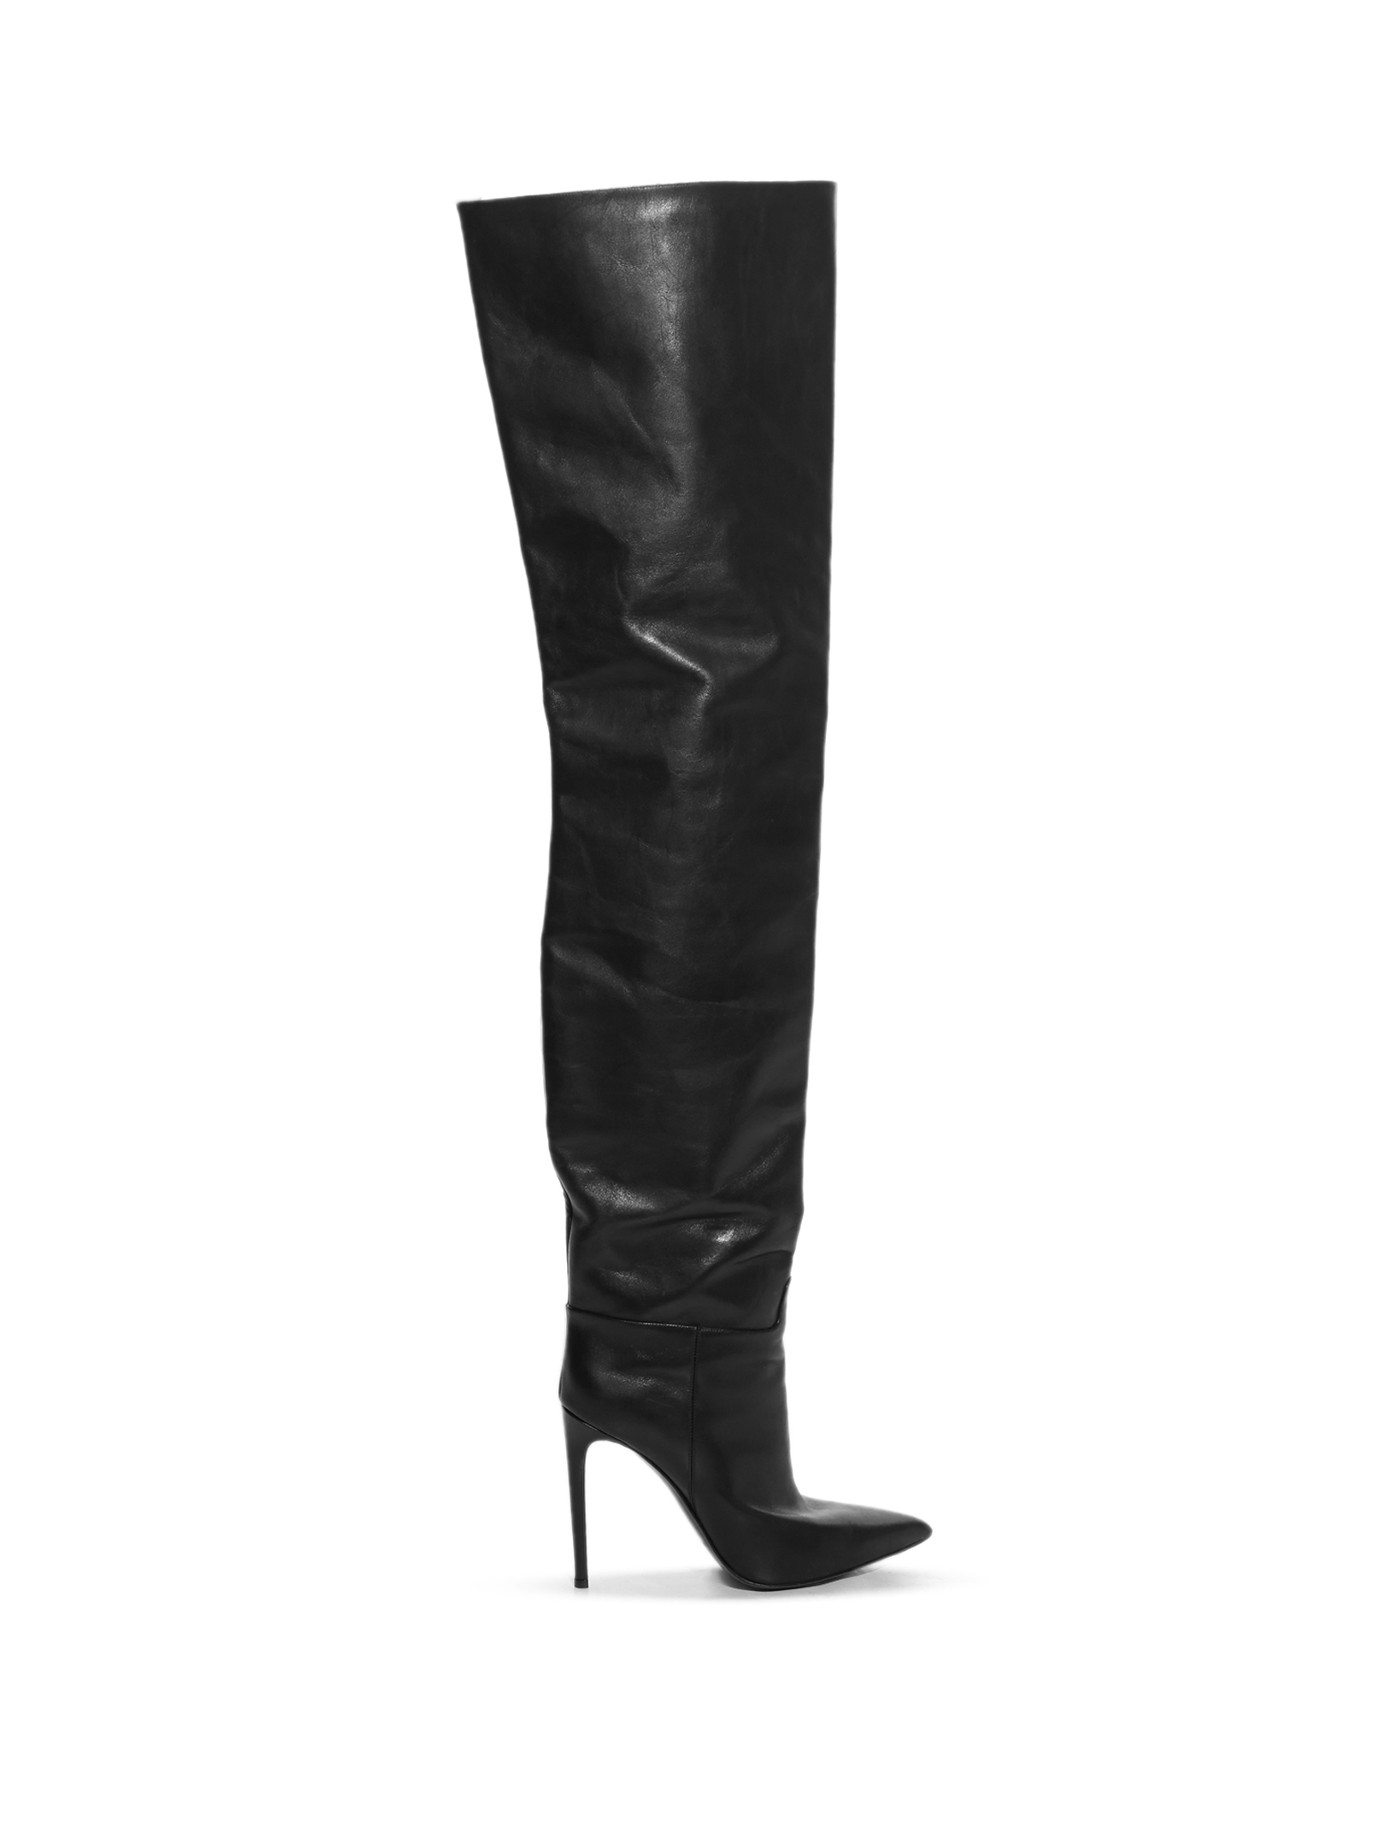 Balenciaga All Time Leather Over-The-Knee Boots in Black | Lyst